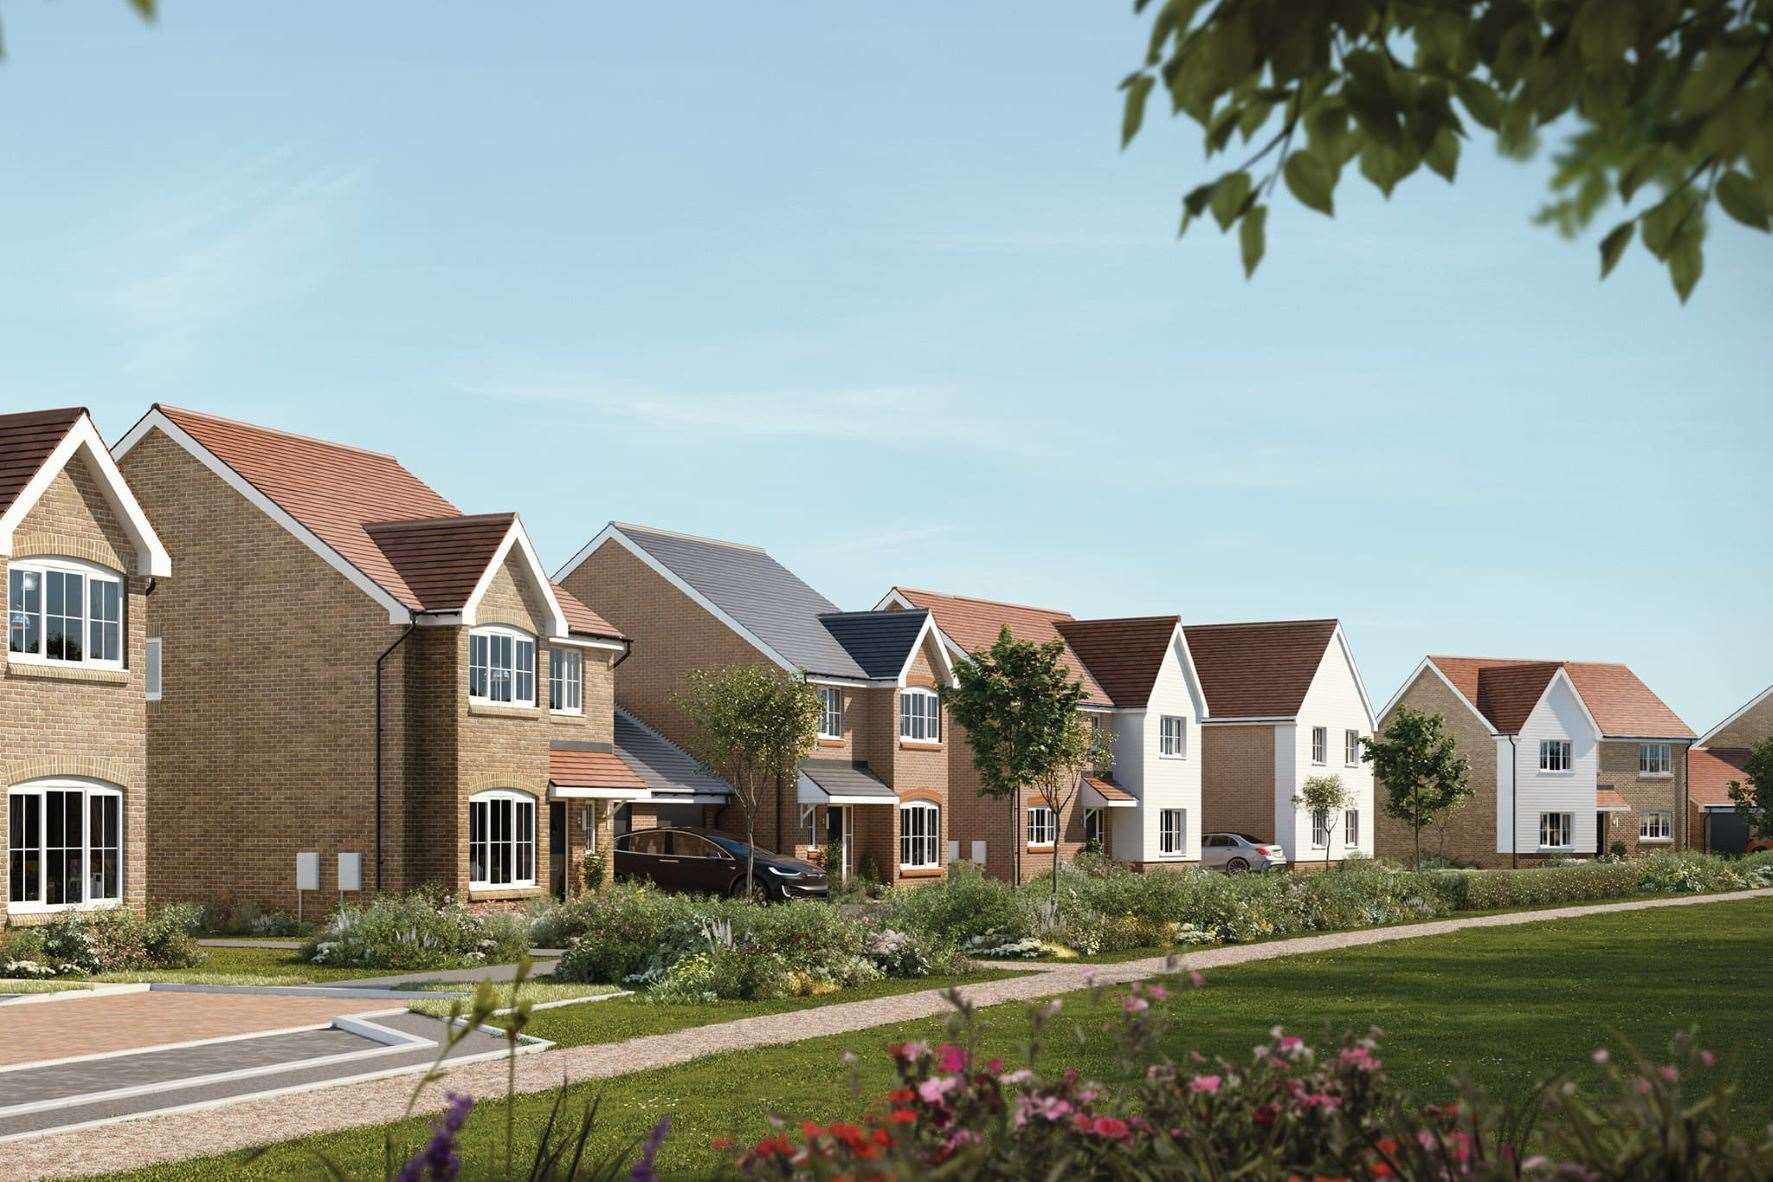 A CGI of what the new Bellway homes at Parsonage Place will look like